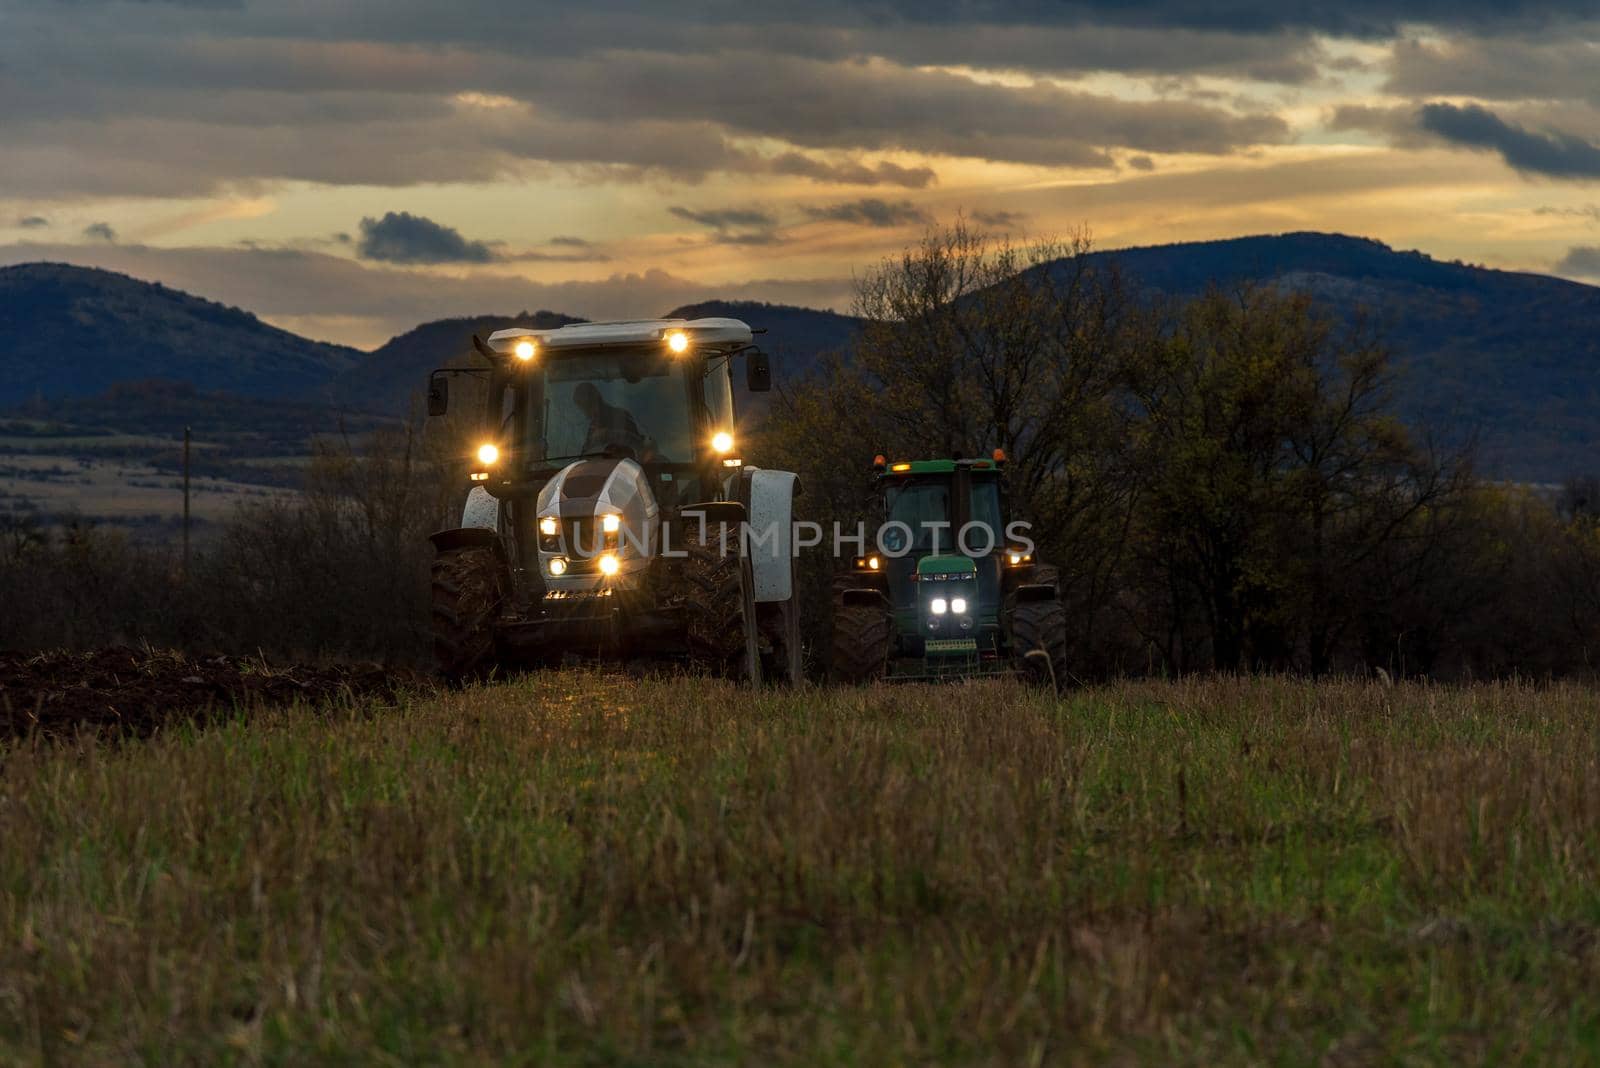 Farmer in tractor preparing land with cultivator at night